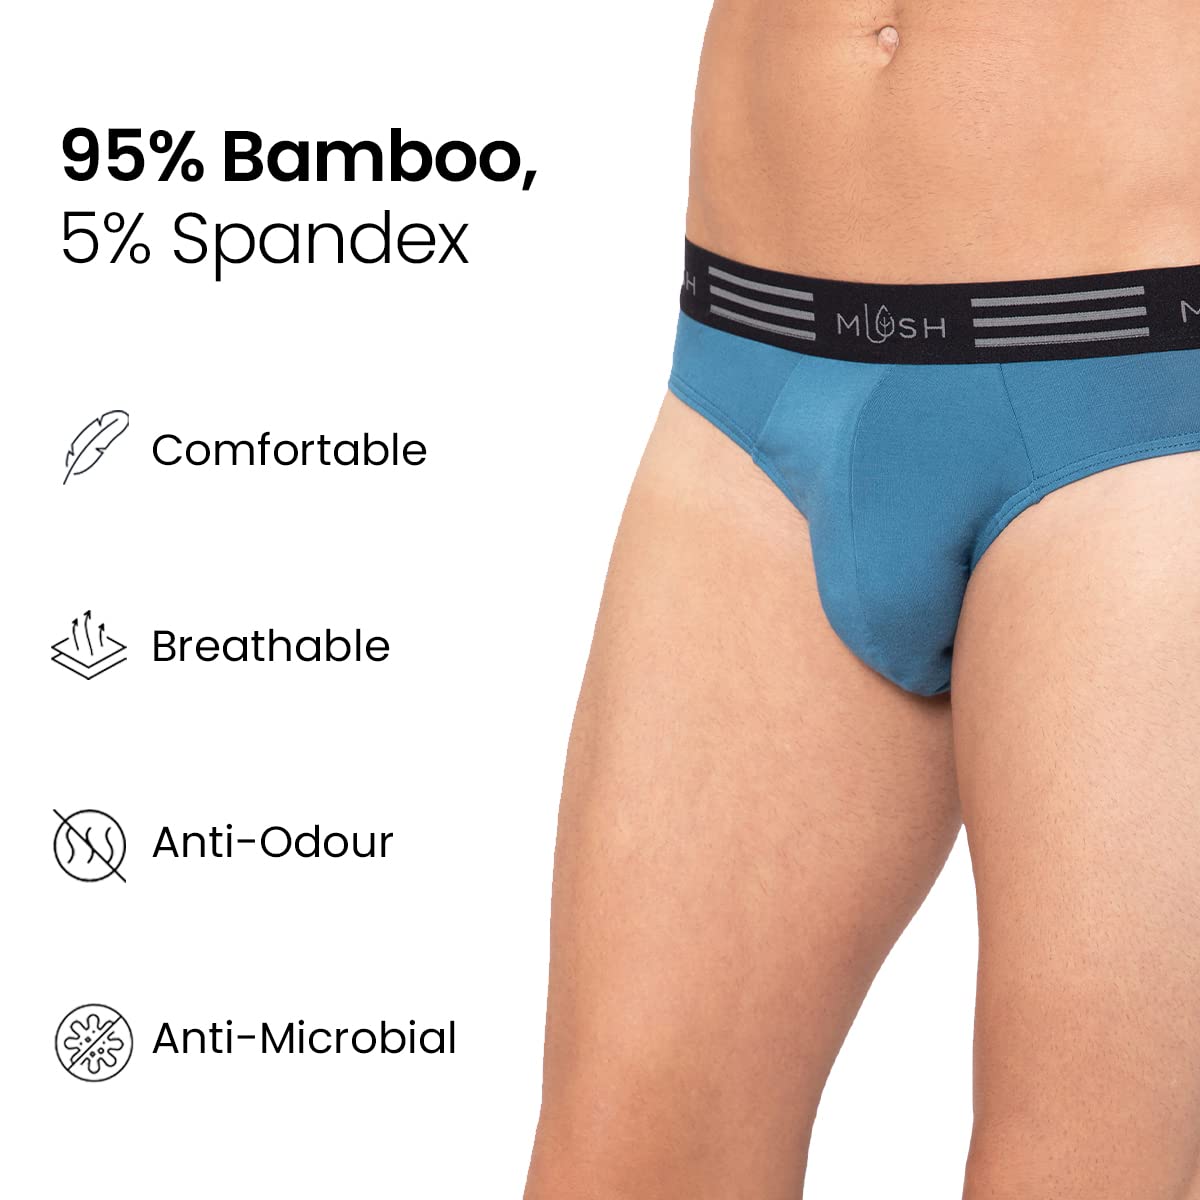 Mush Ultra Soft, Breathable, Feather Light Men's Bamboo Brief || Naturally Anti-Odor and Anti-Microbial Bamboo Innerwear (Pack of 2)